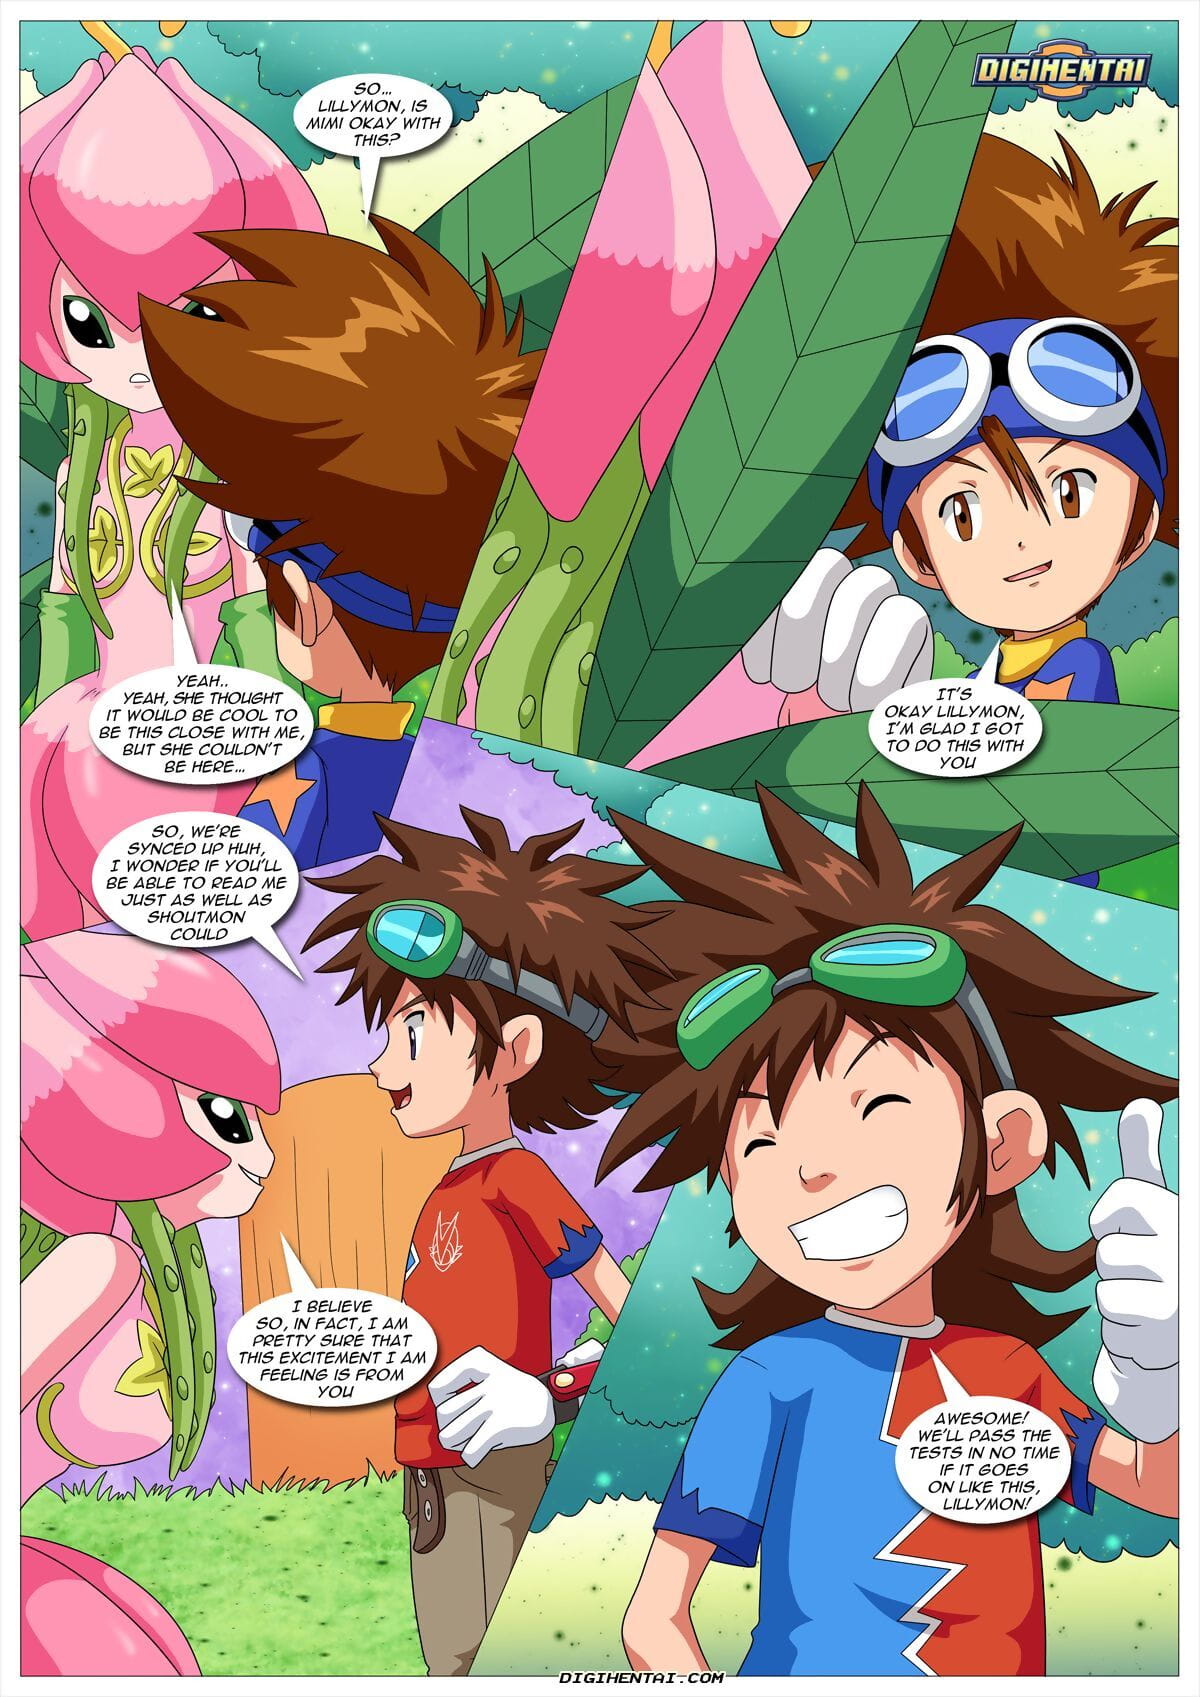 Digimon- Digtal Lovero – Palcomix page 1